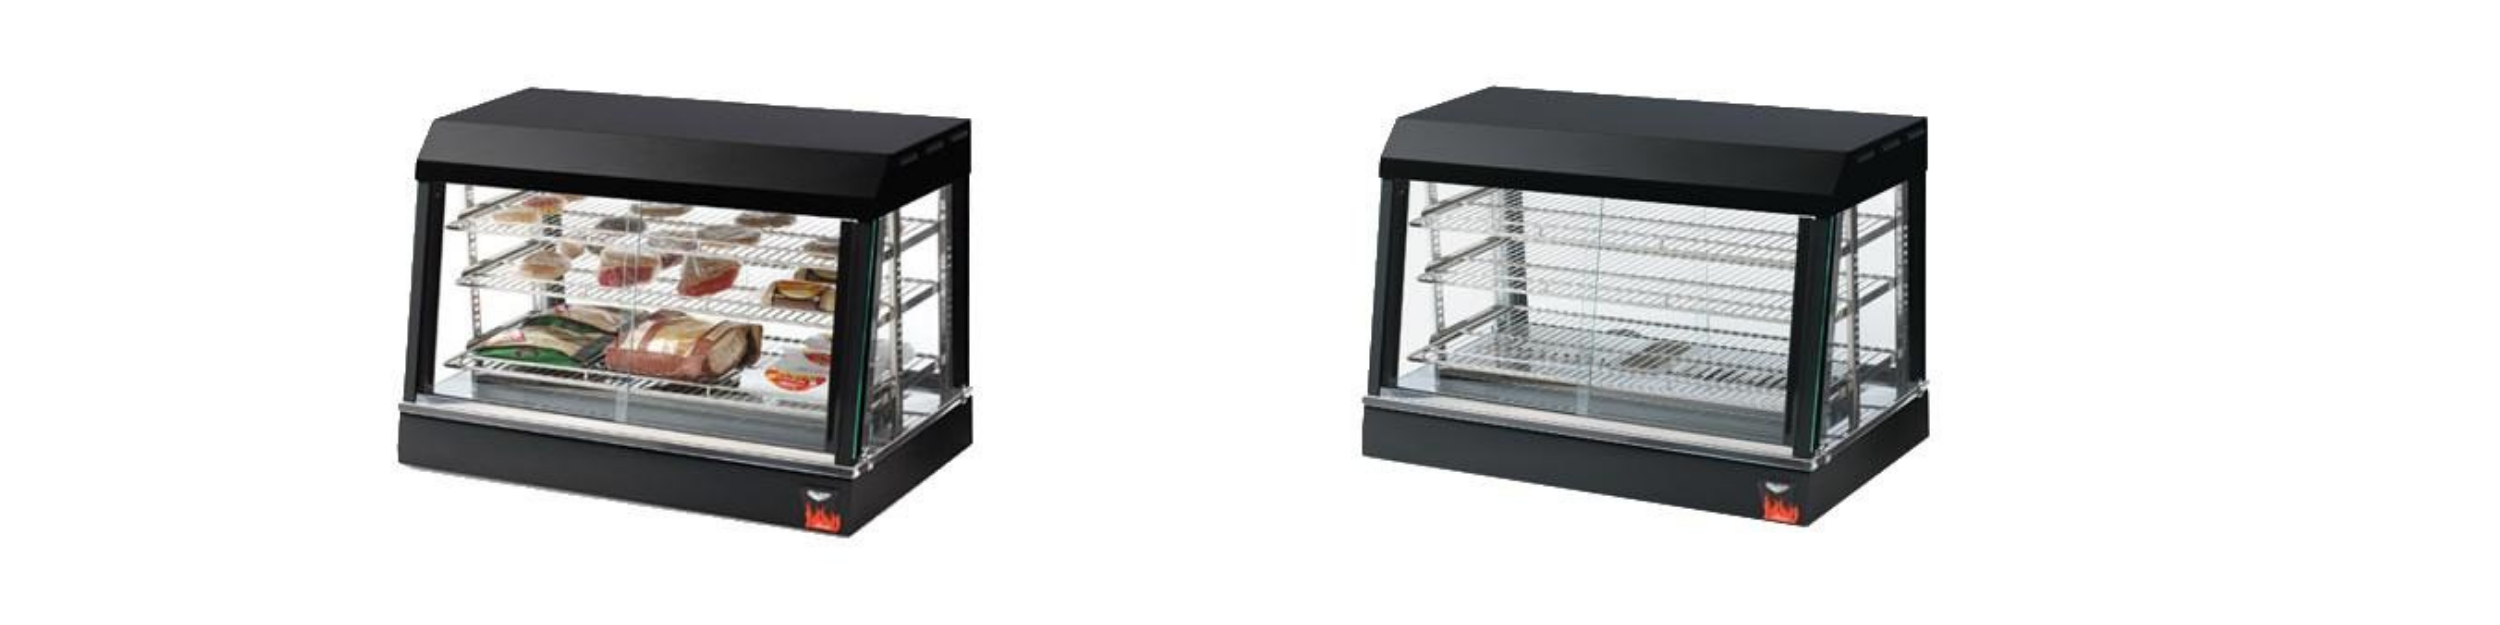 Heated bakery display cases